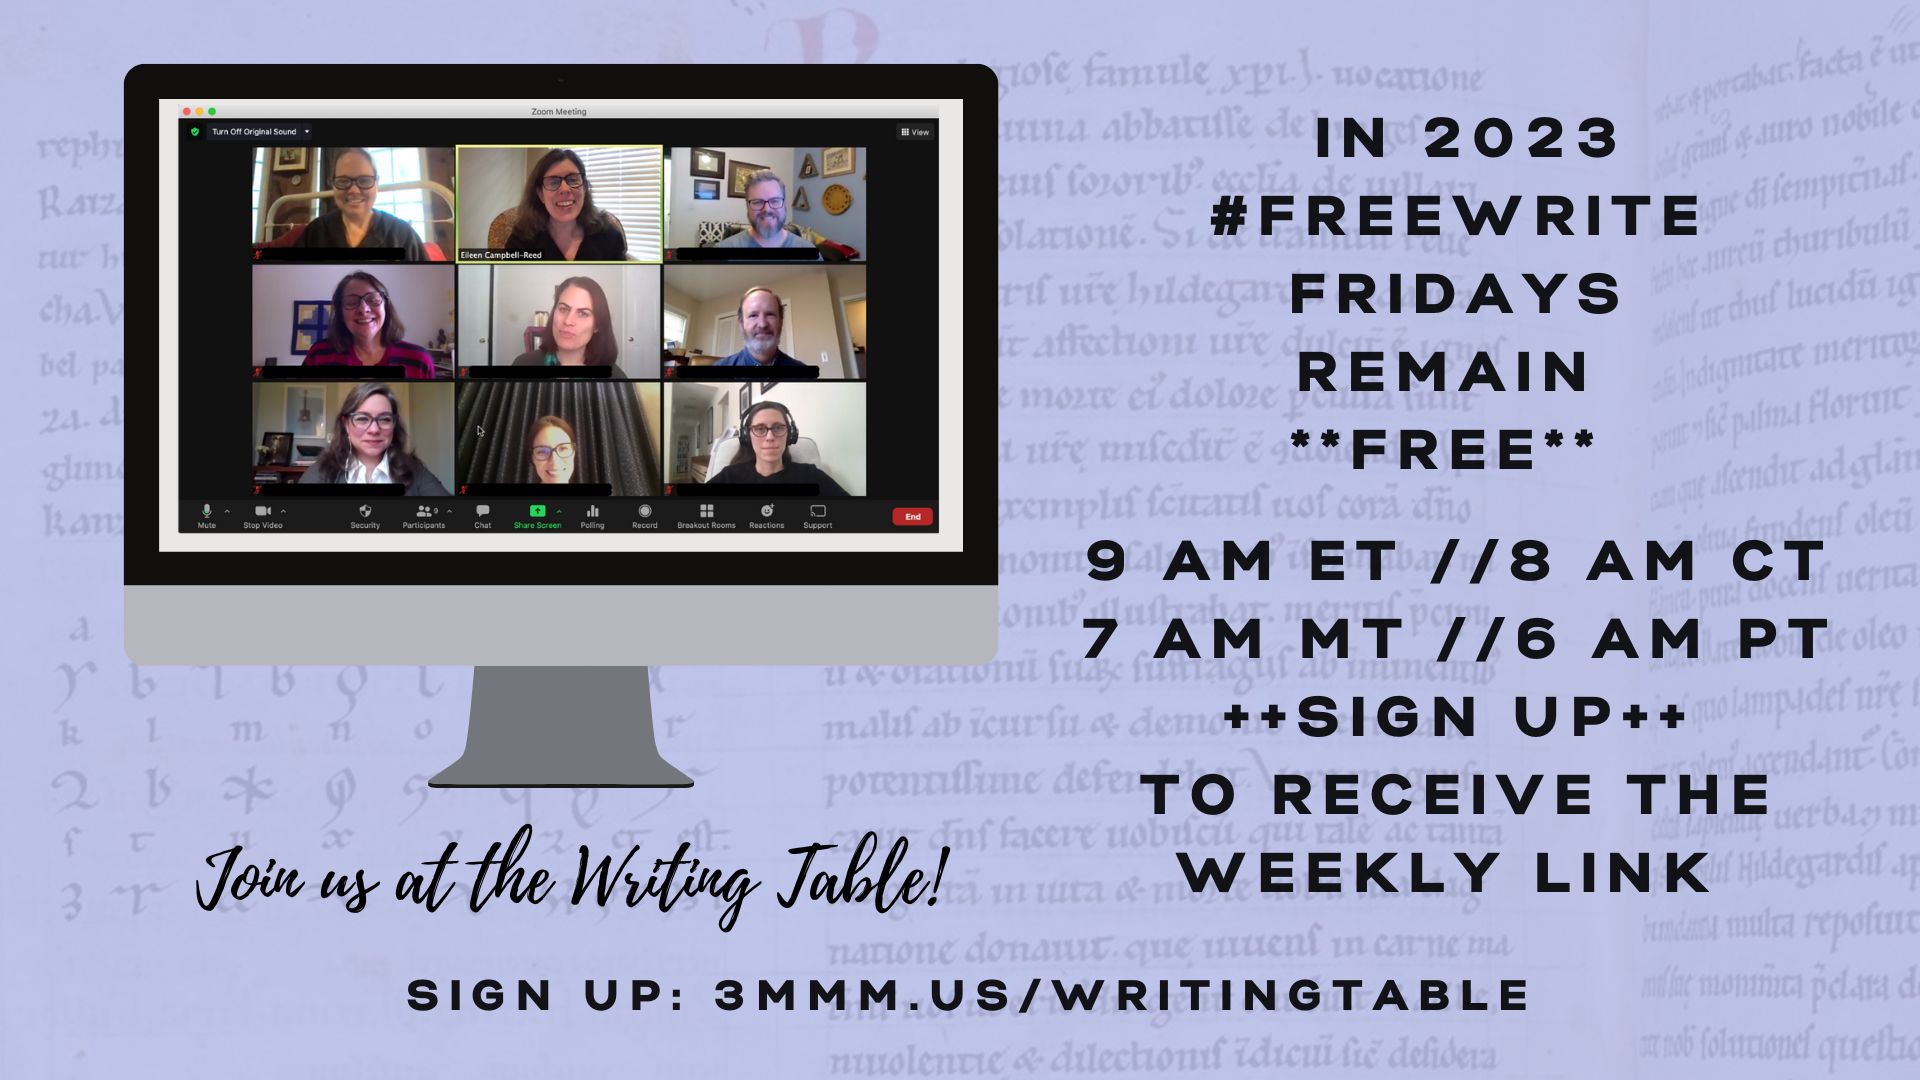 writing table and #freewrite fridays info